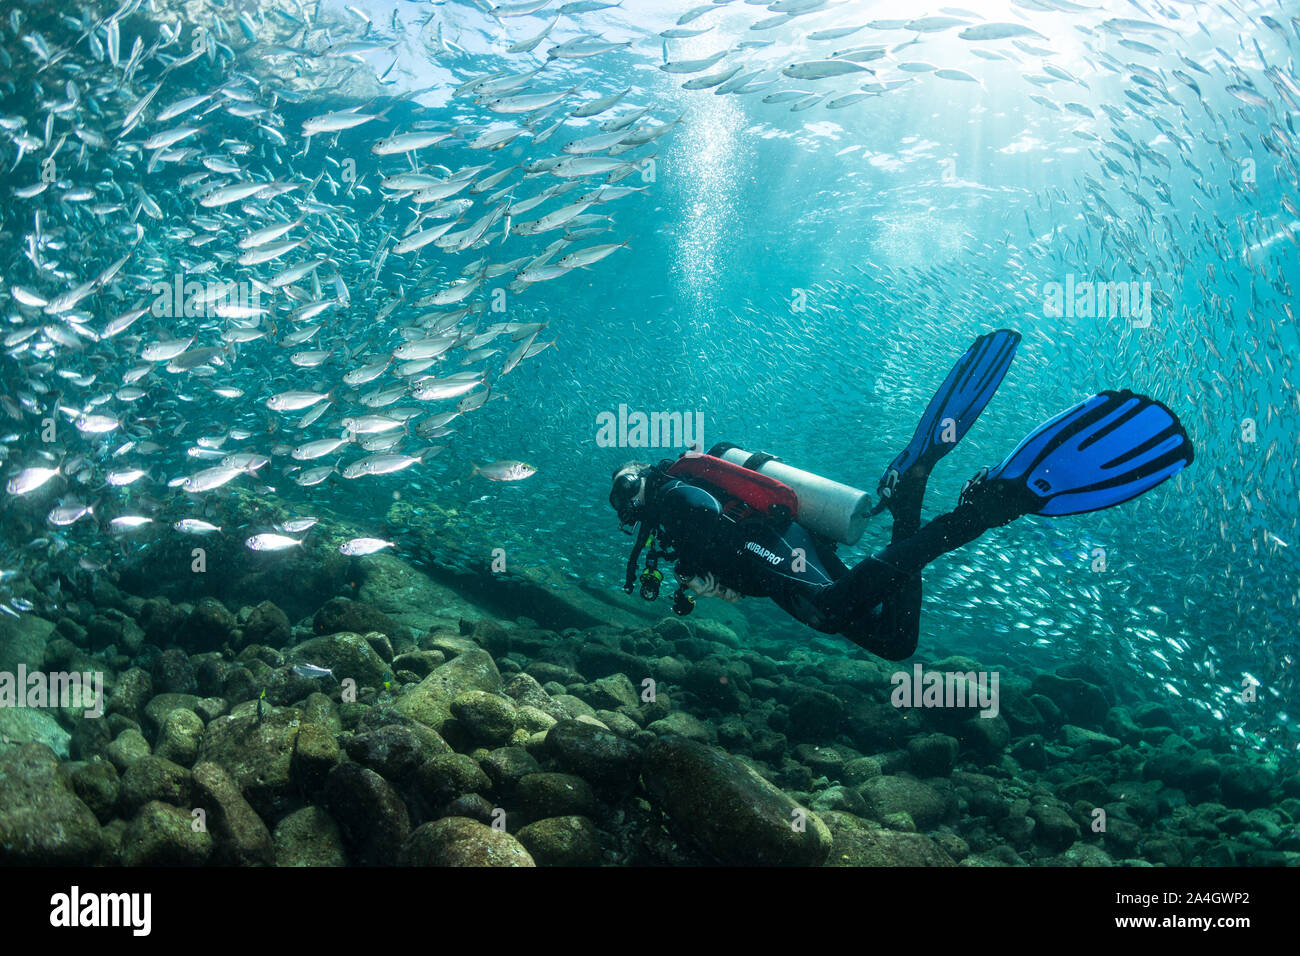 A scuba diver explores the reef around Los Islotes, watching a large school of baitfish swimming around her. Stock Photo